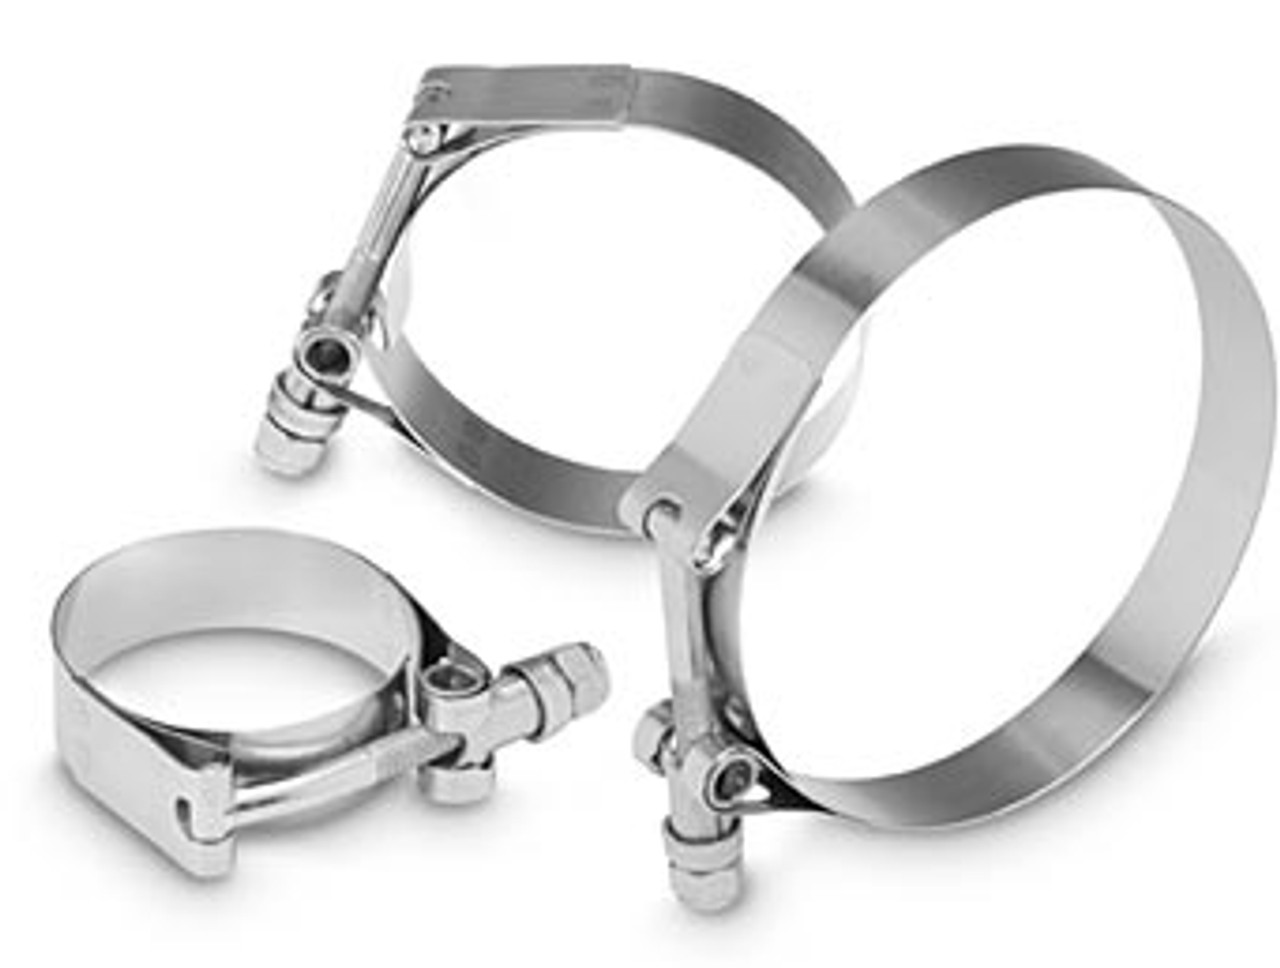 Clampco AKI212 T-Bolt Band Clamp - 1.93"-2.24" Range - Each - Stainless Steel